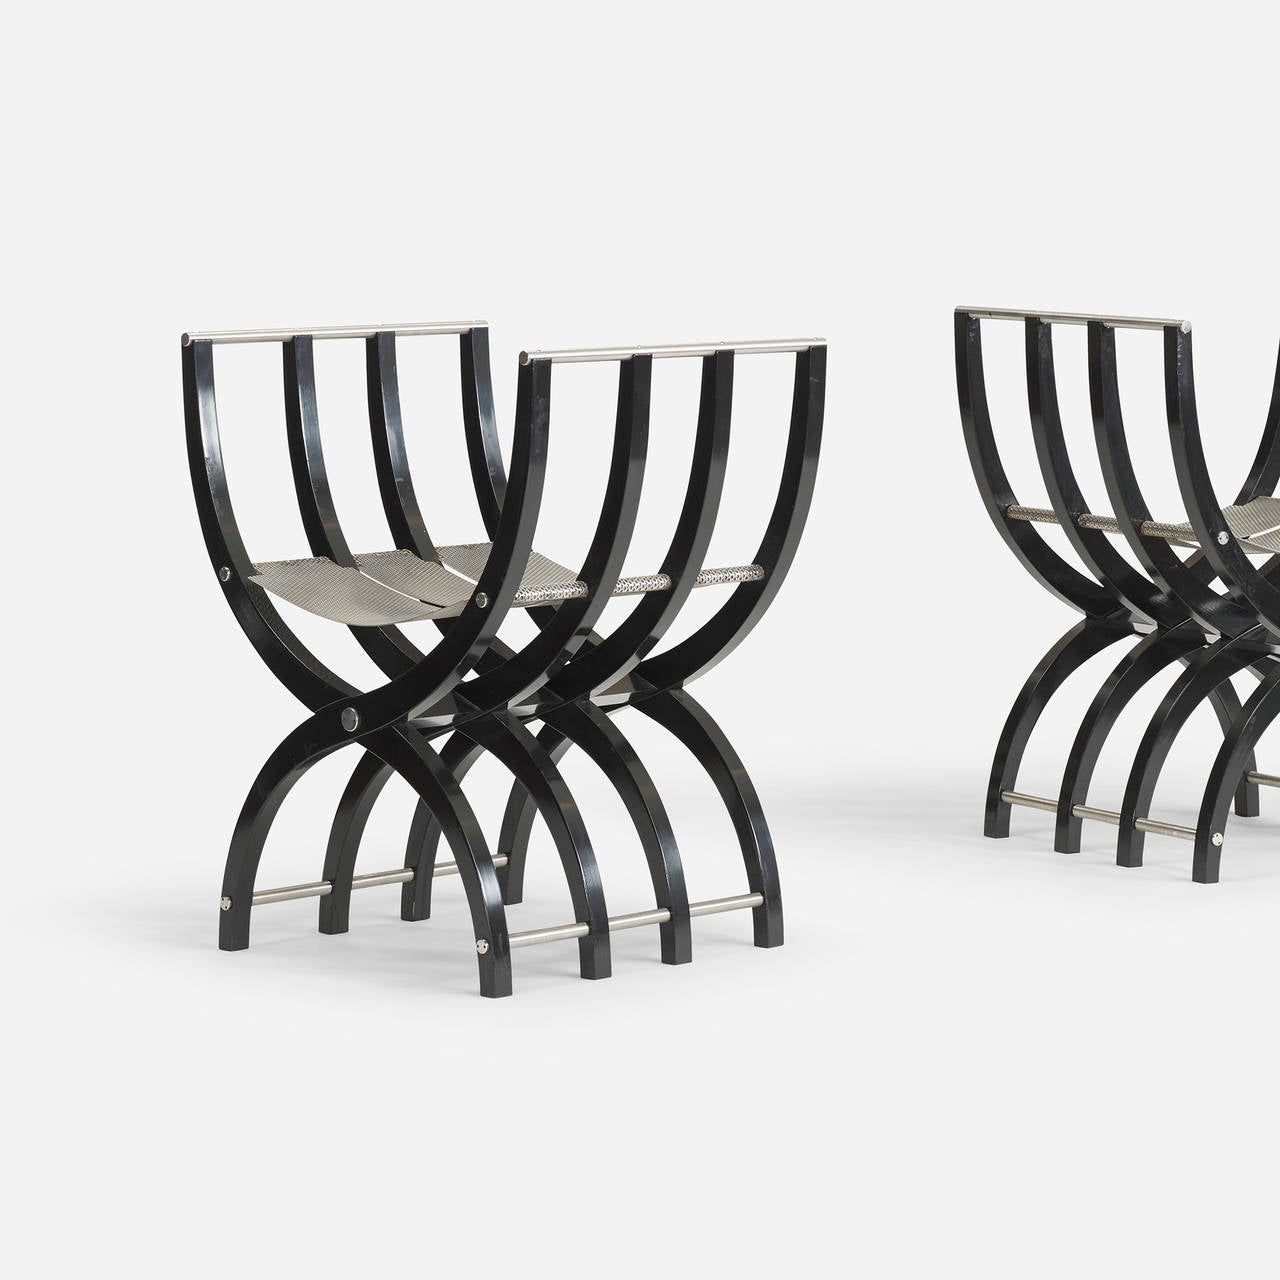 These stools come from the Arken Museum of Modern Art which was designed by Søren Robert Lund after winning the commission through a national competition in 1988.